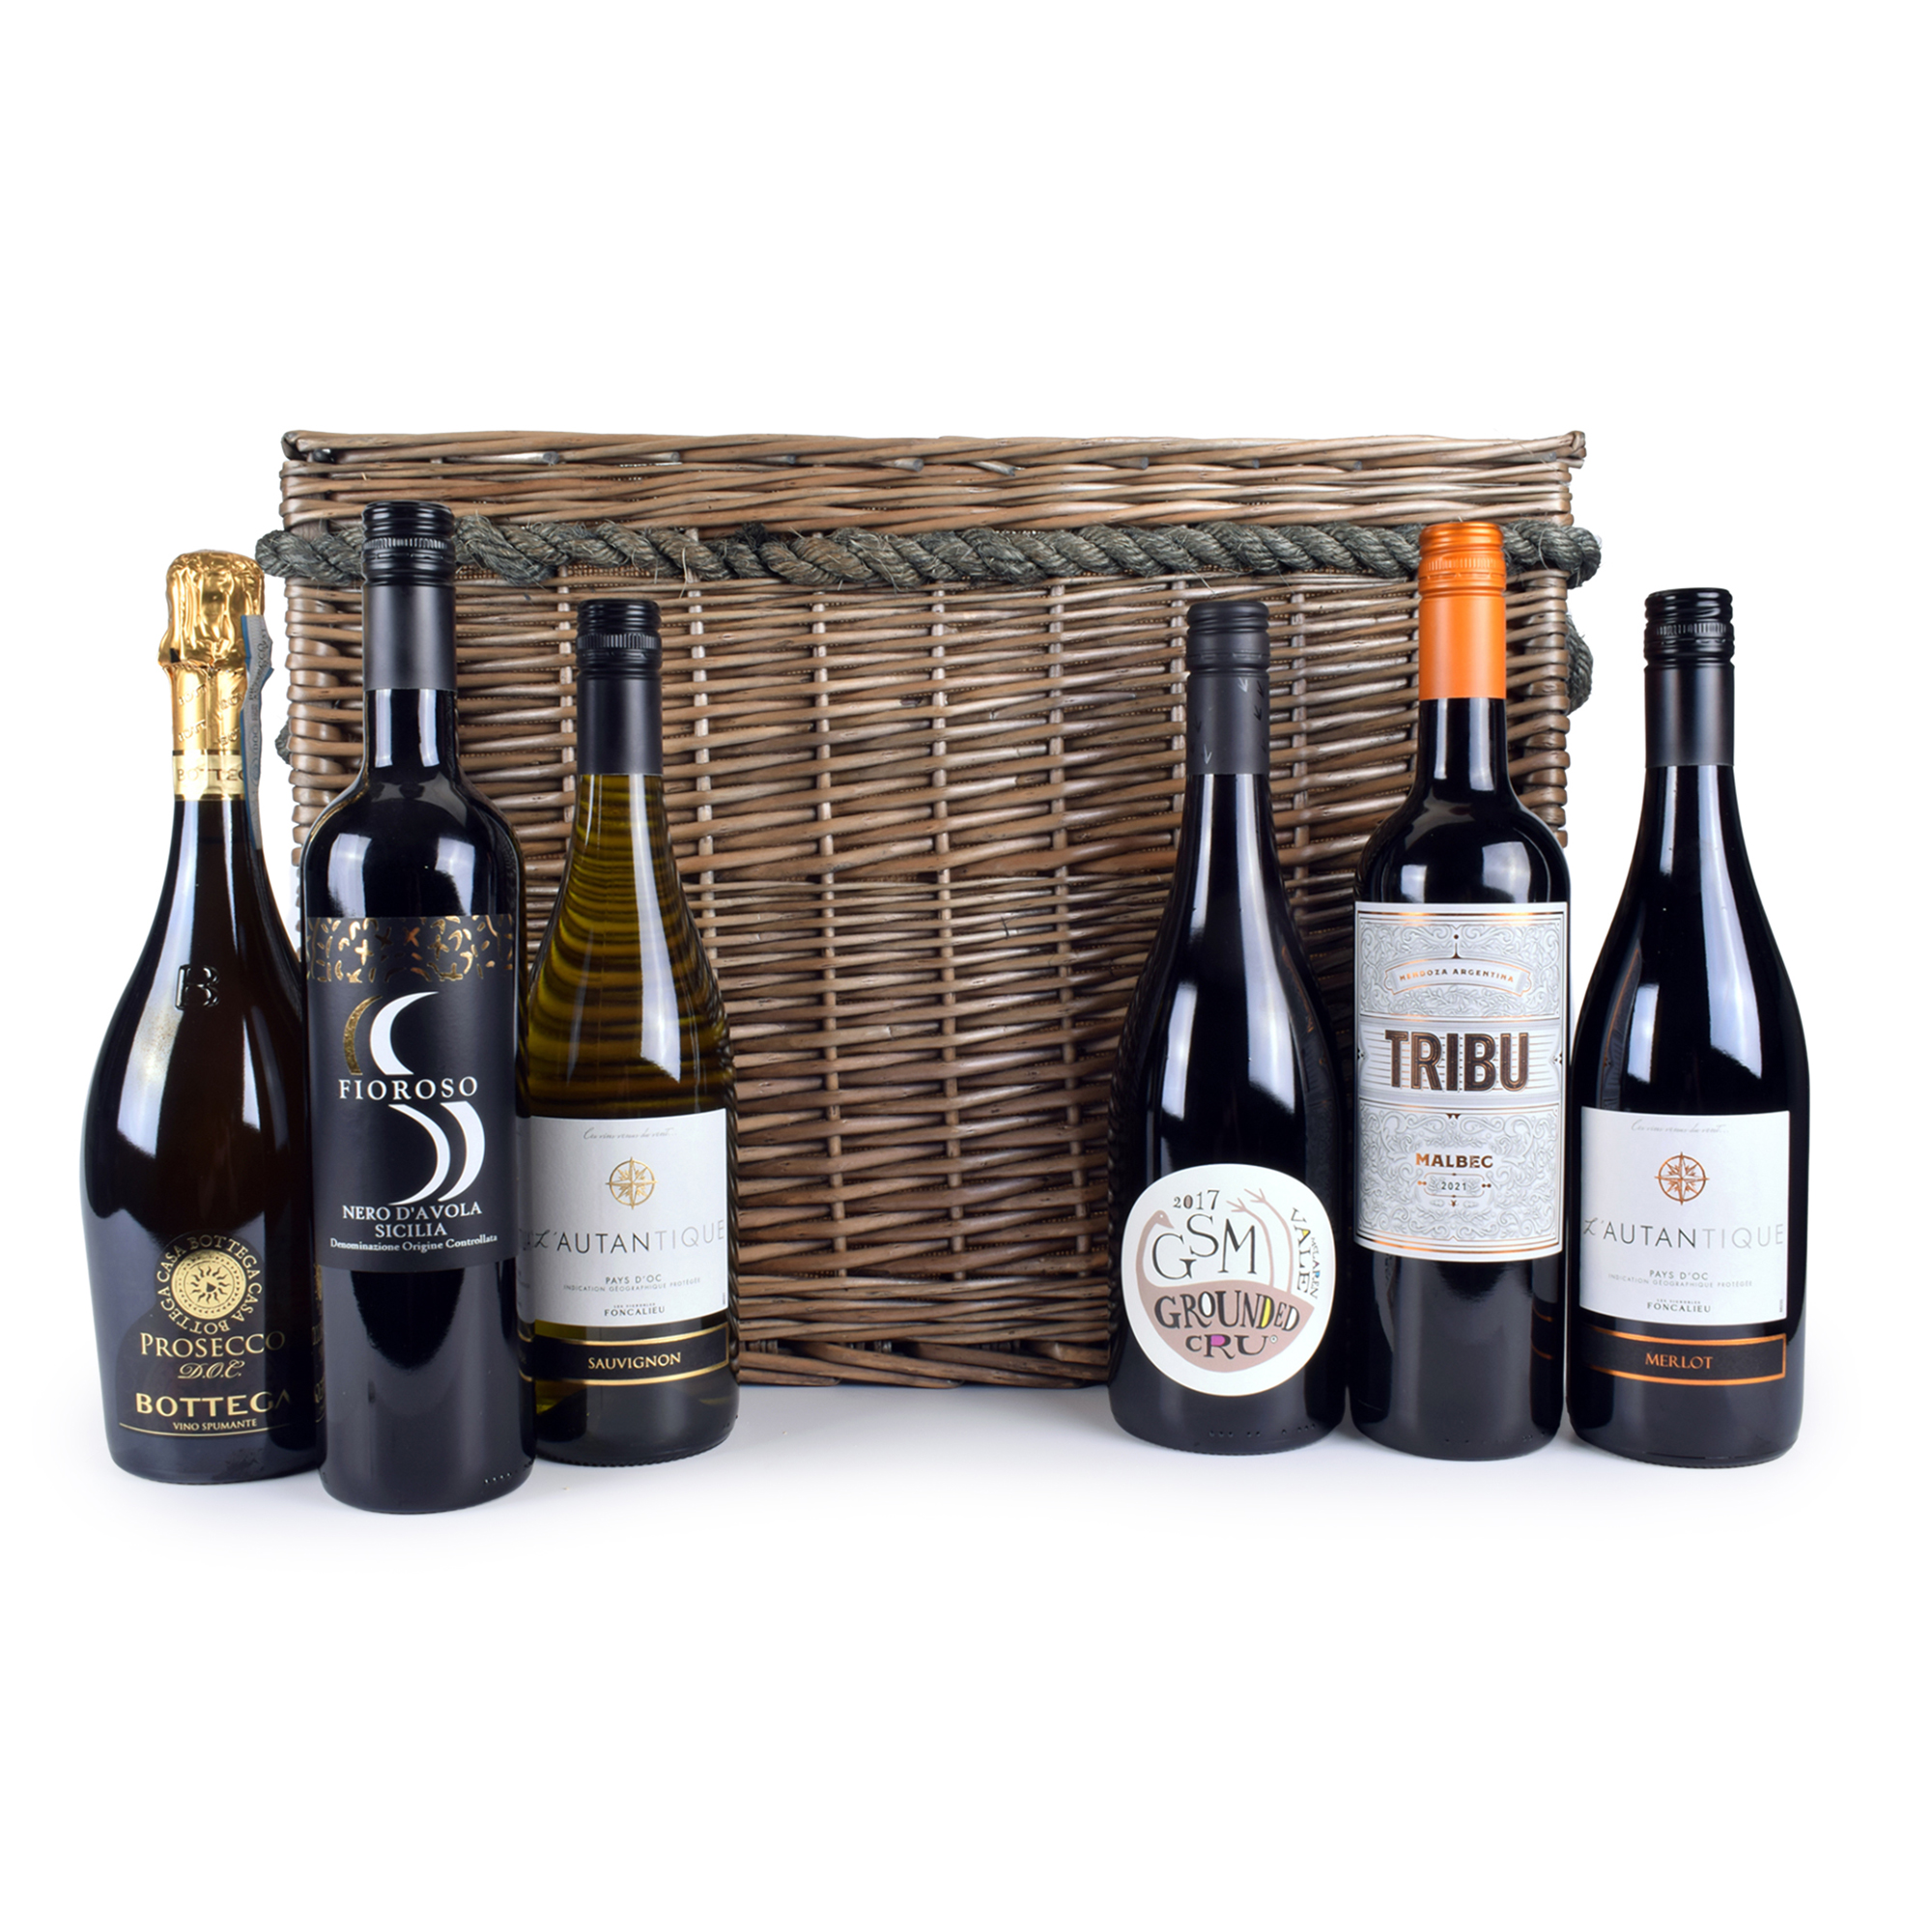 The Wine Selection Basket